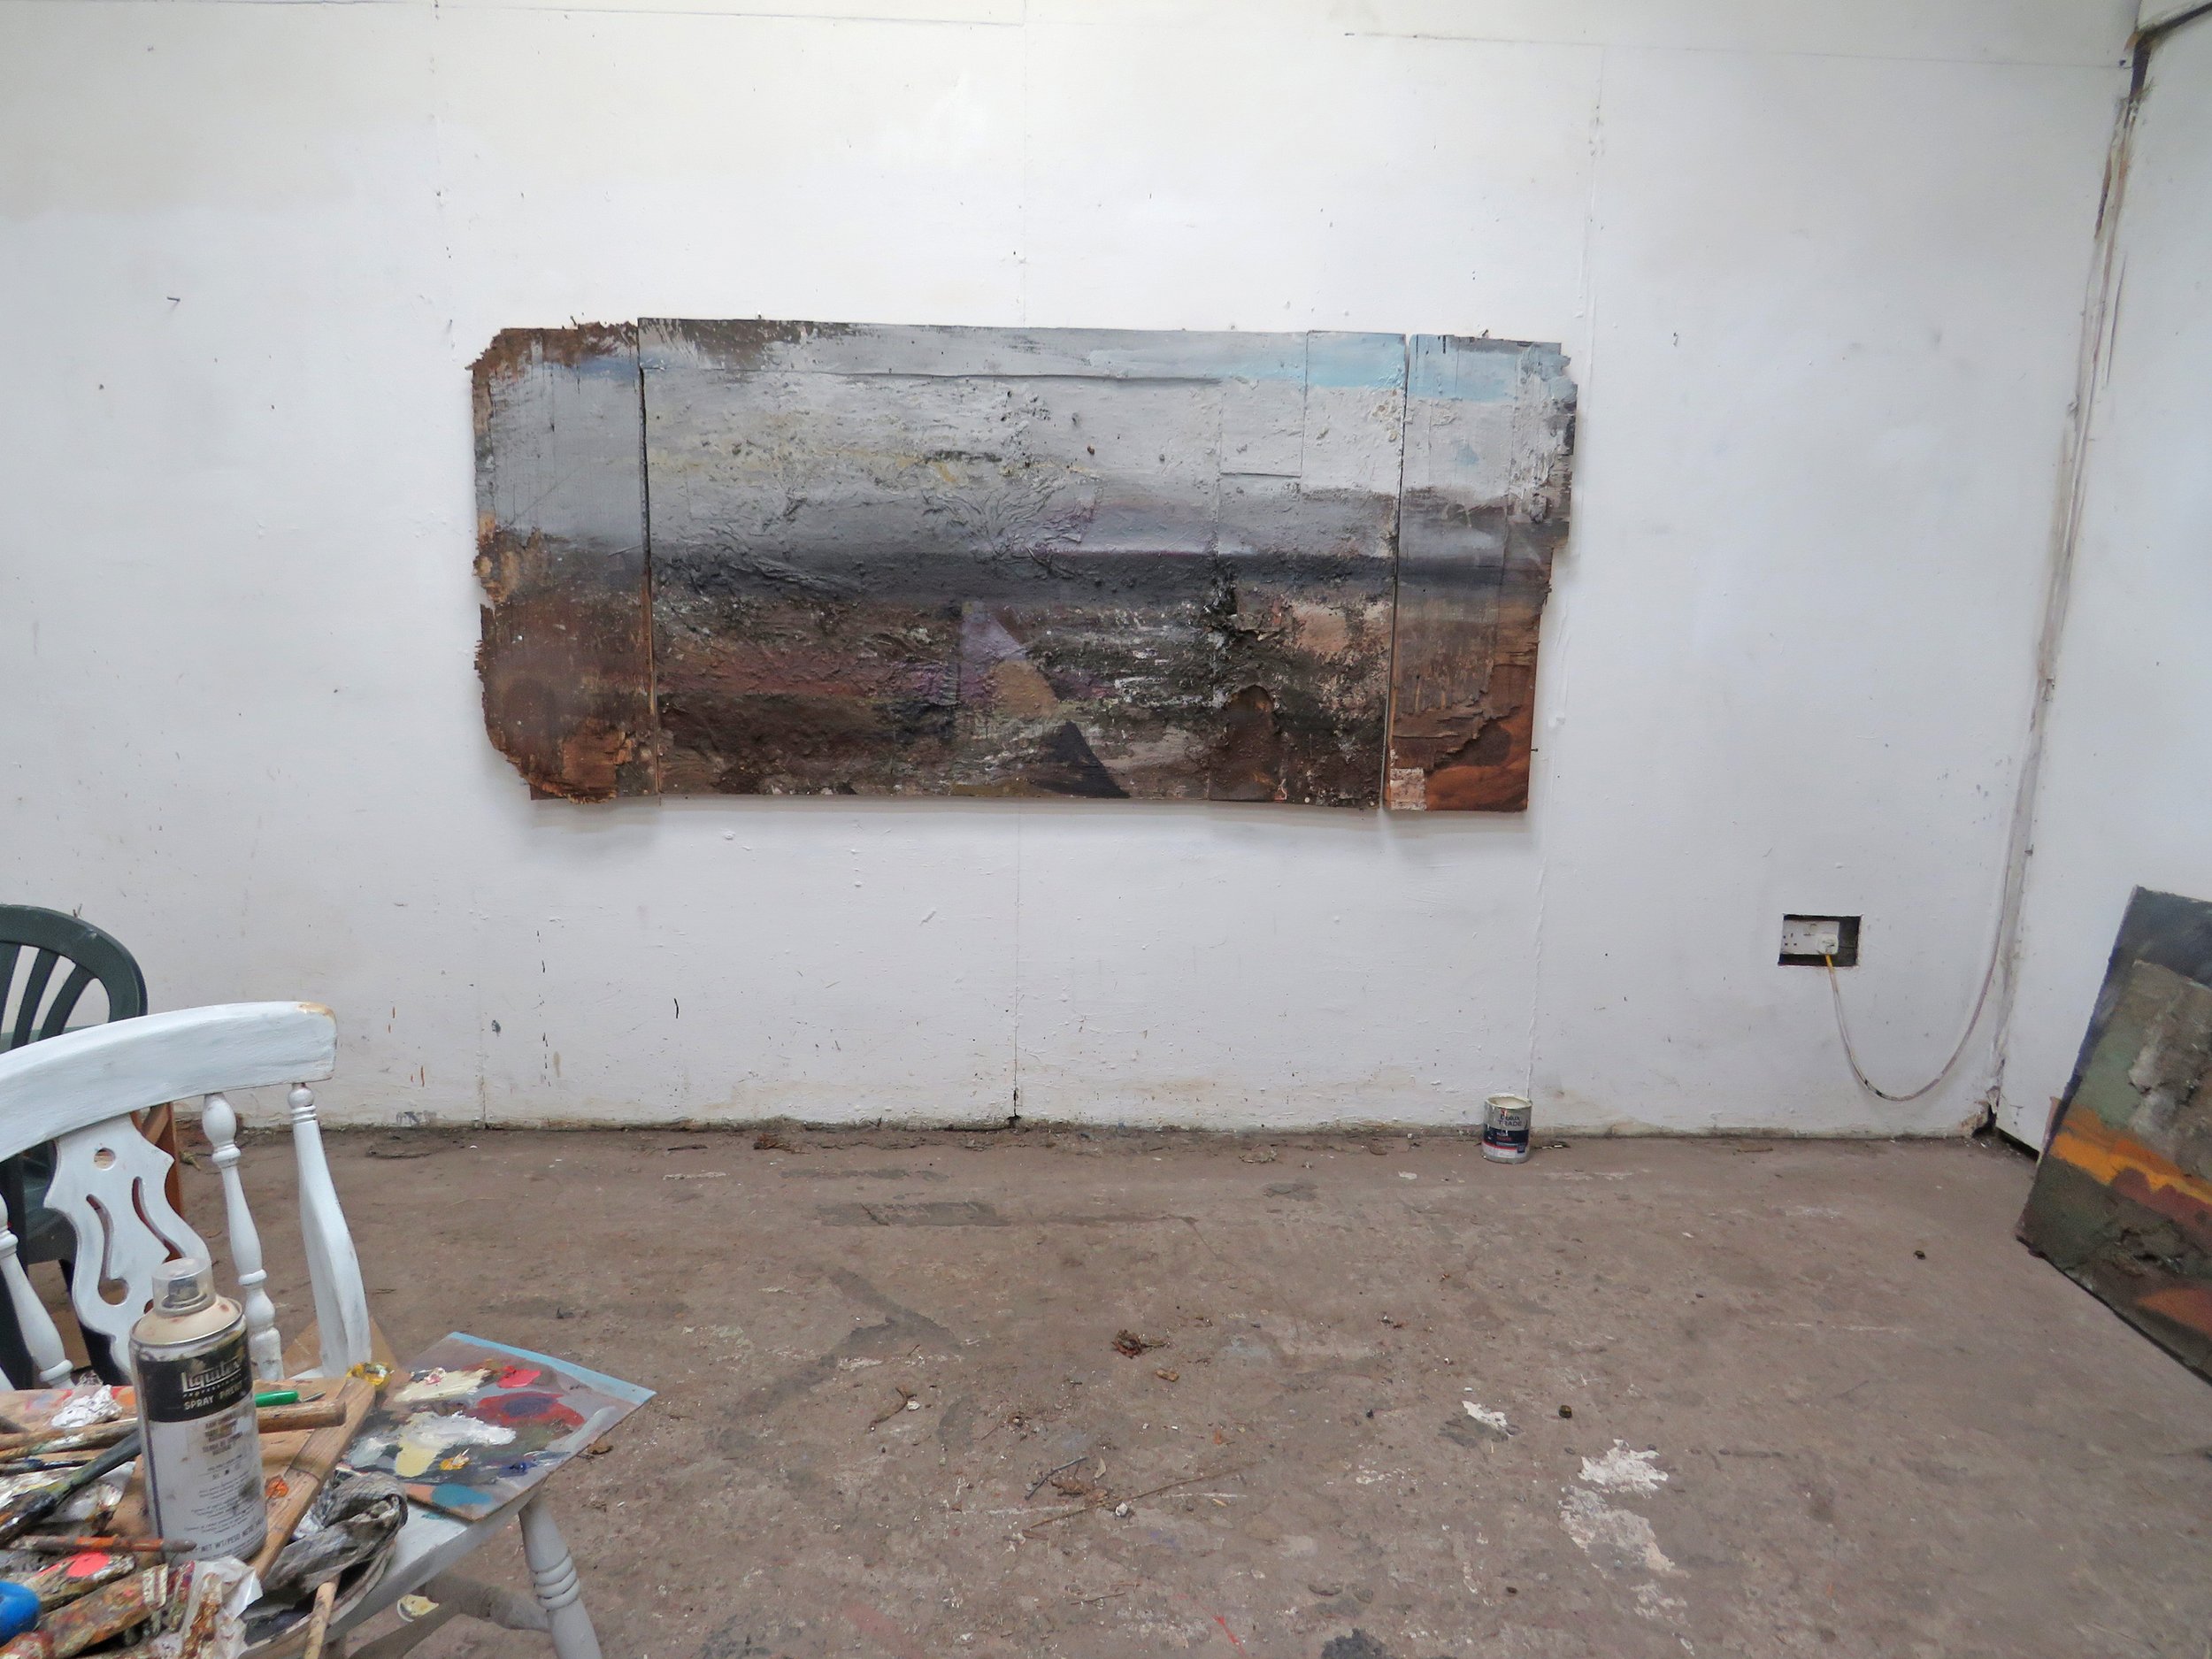 Studio View, Estuary, Dull Day and Sewer Pipe 103 x 198 cms